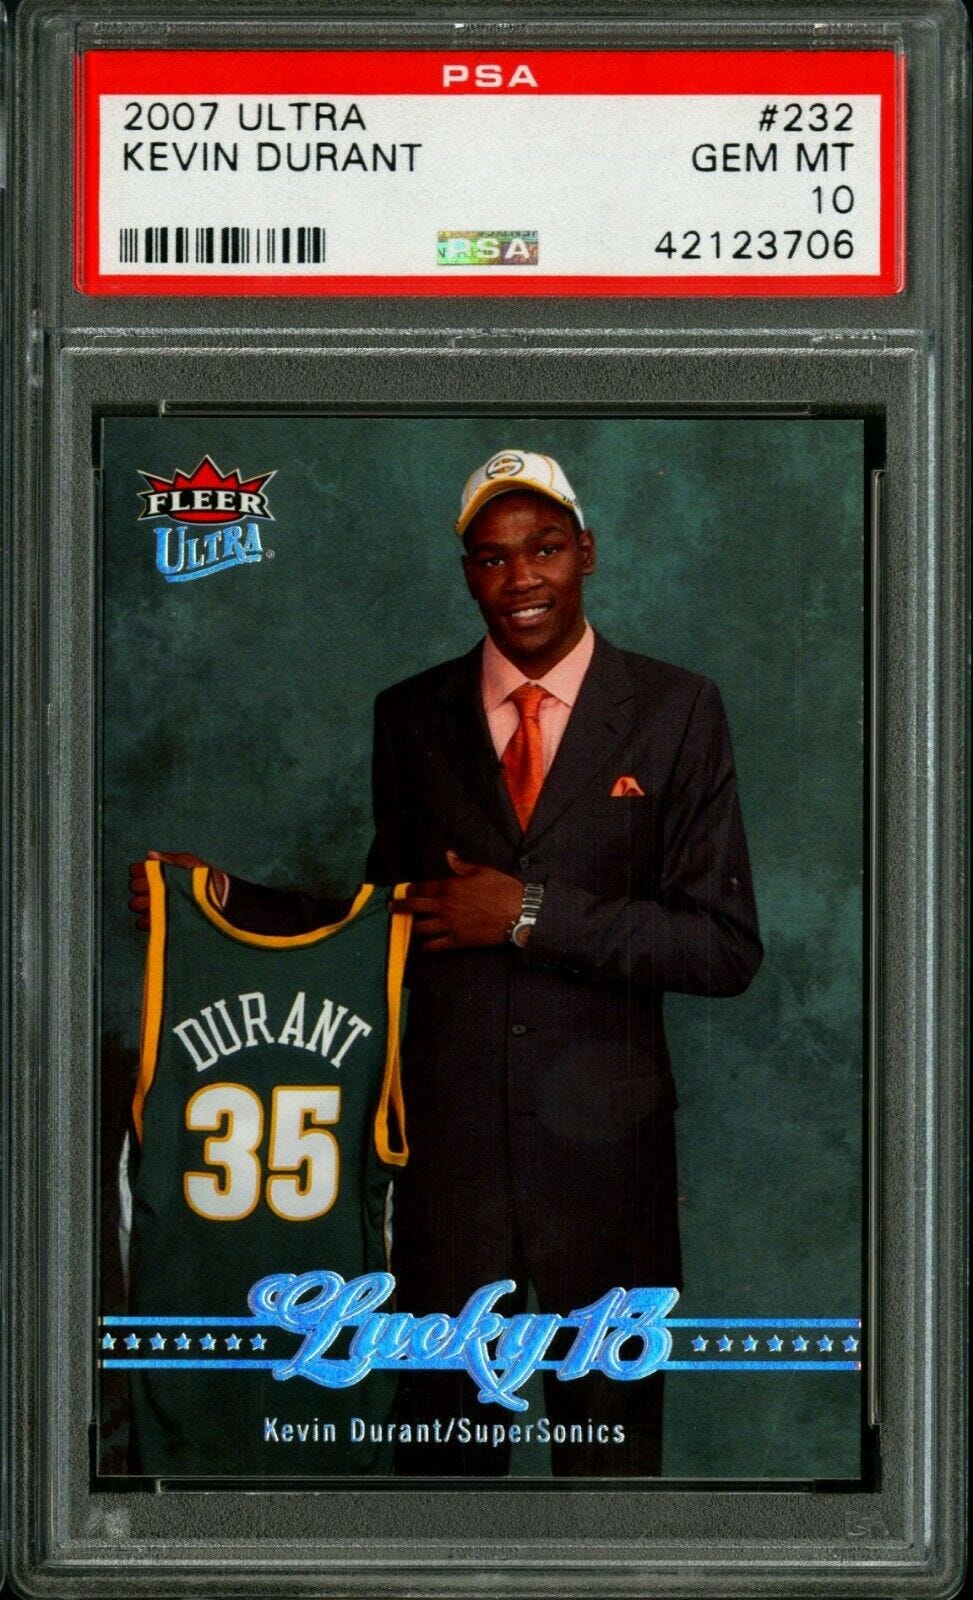 Image 1 - 2007-Kevin-Durant-Fleer-Ultra-RC-232-Rookie-PSA-10-Lucky-13-Silver-Prizm-Gem-35